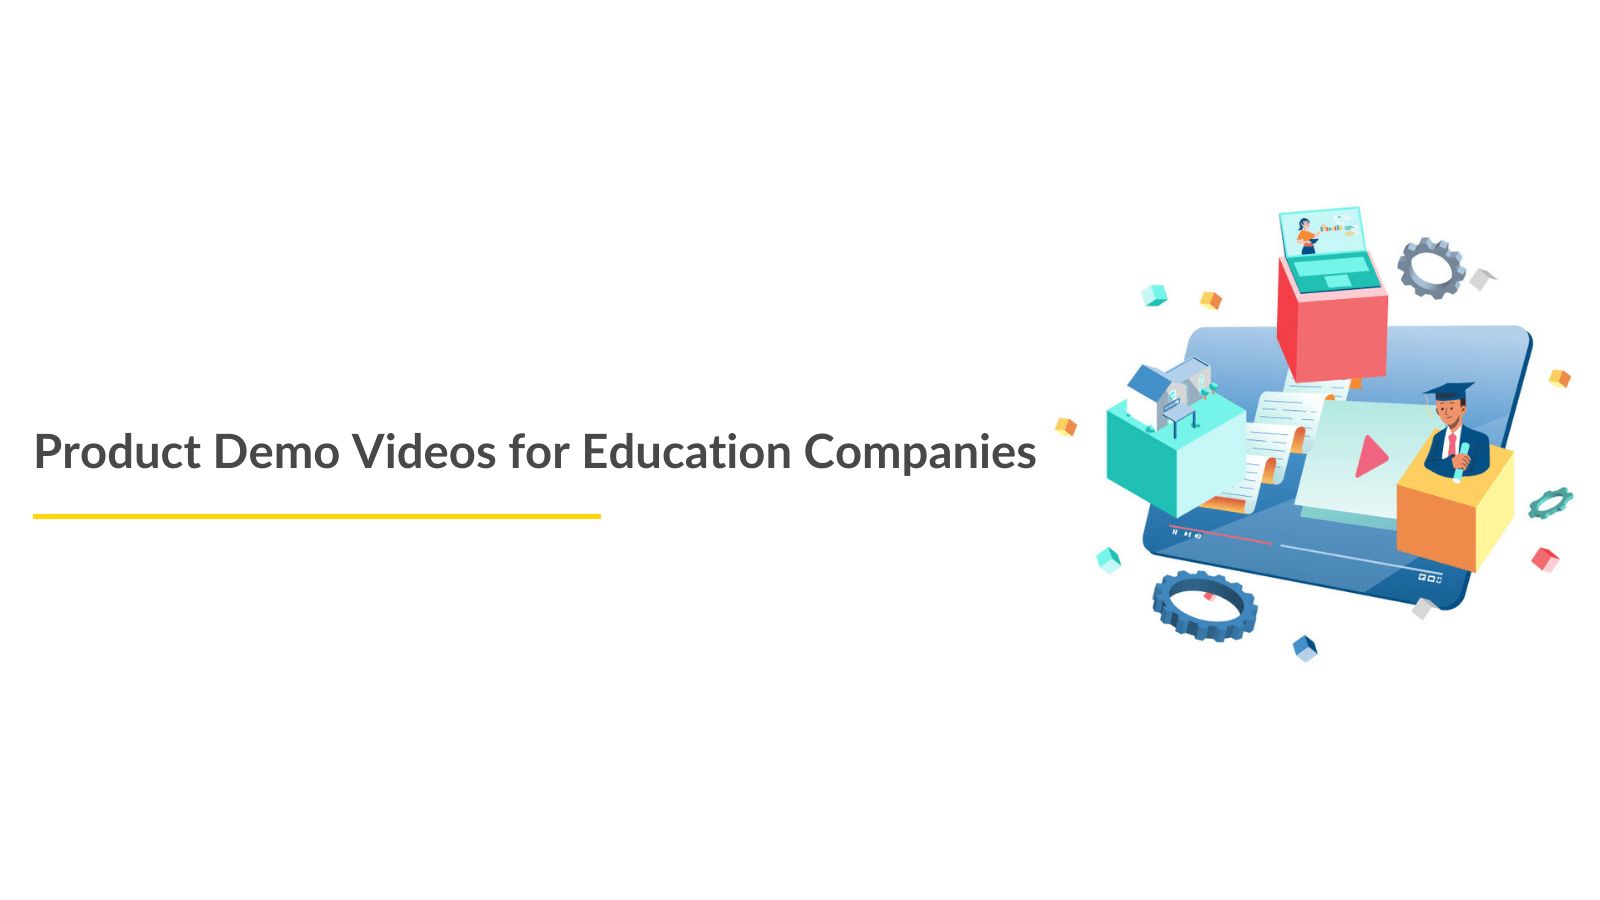 Product Demo Videos for Education Companies